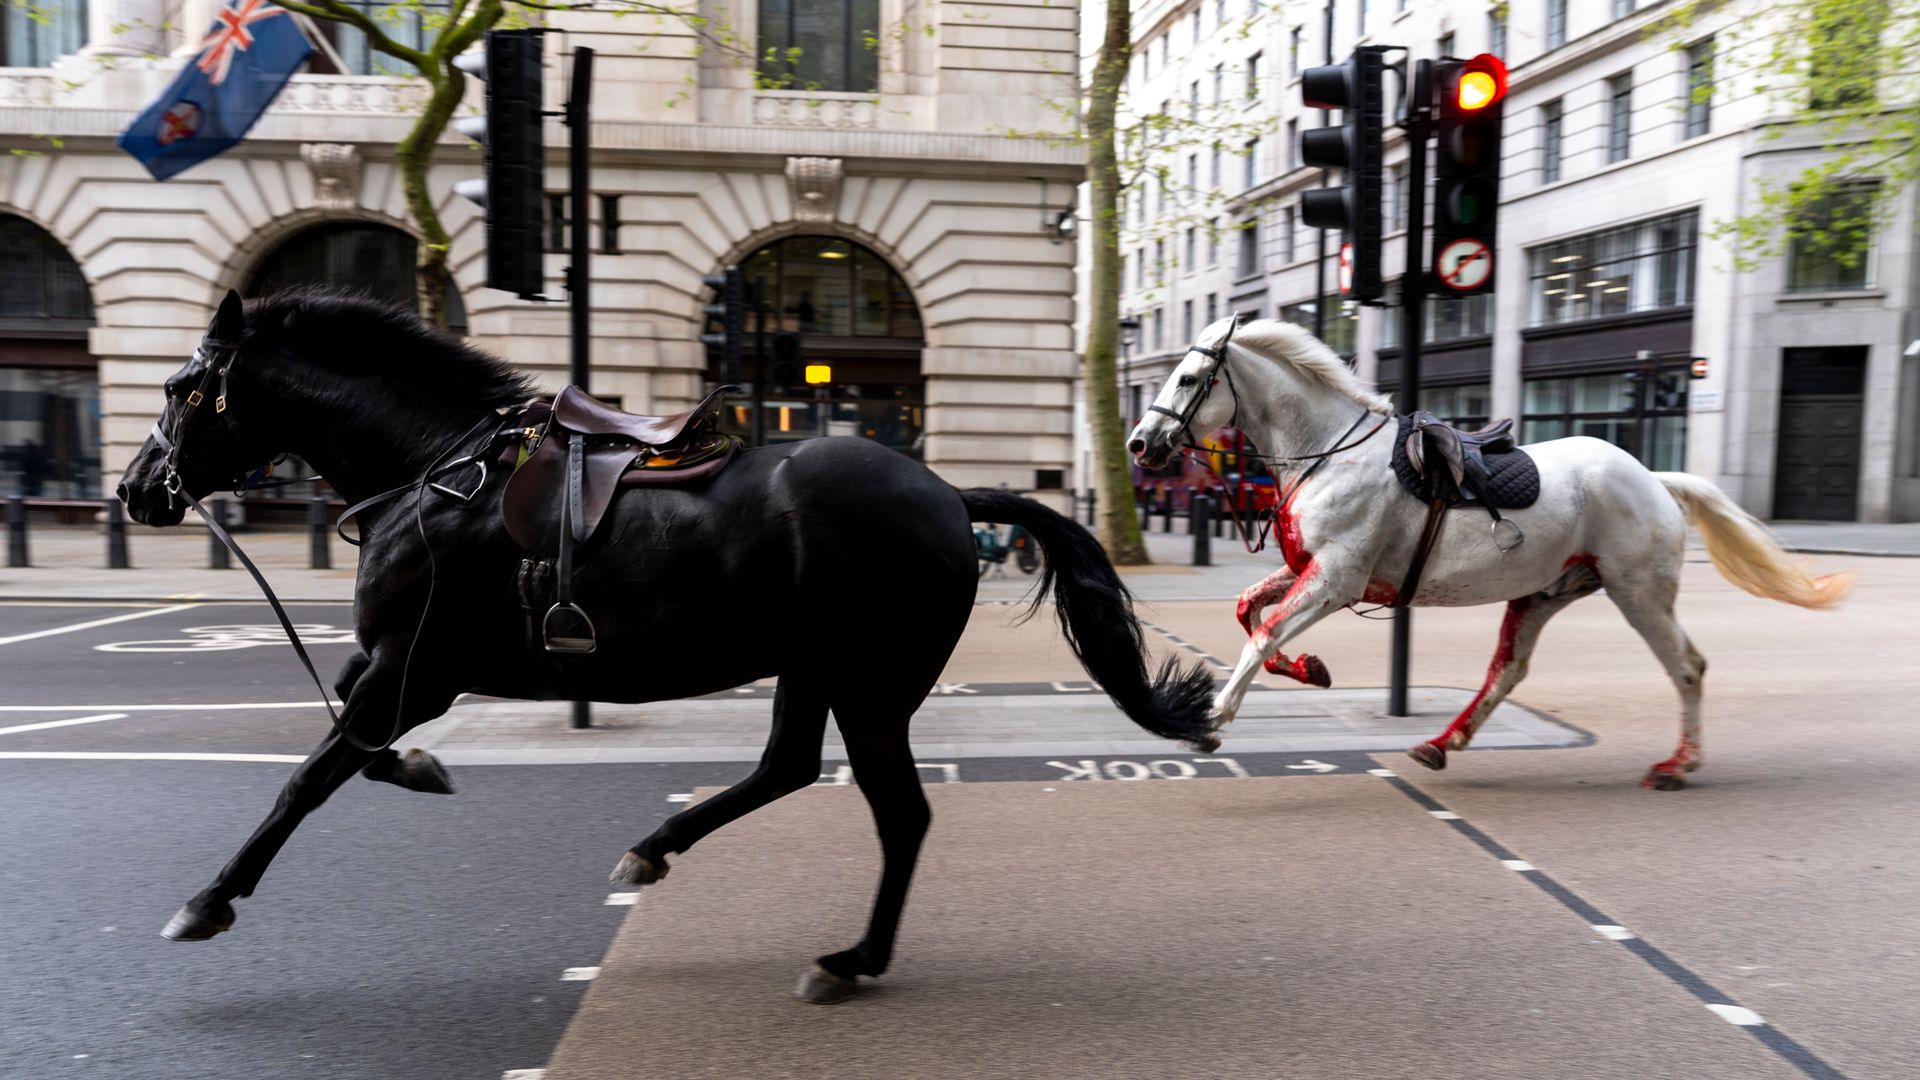 Horses that bolted through London being 'observed' after surgery - with others to return to duty